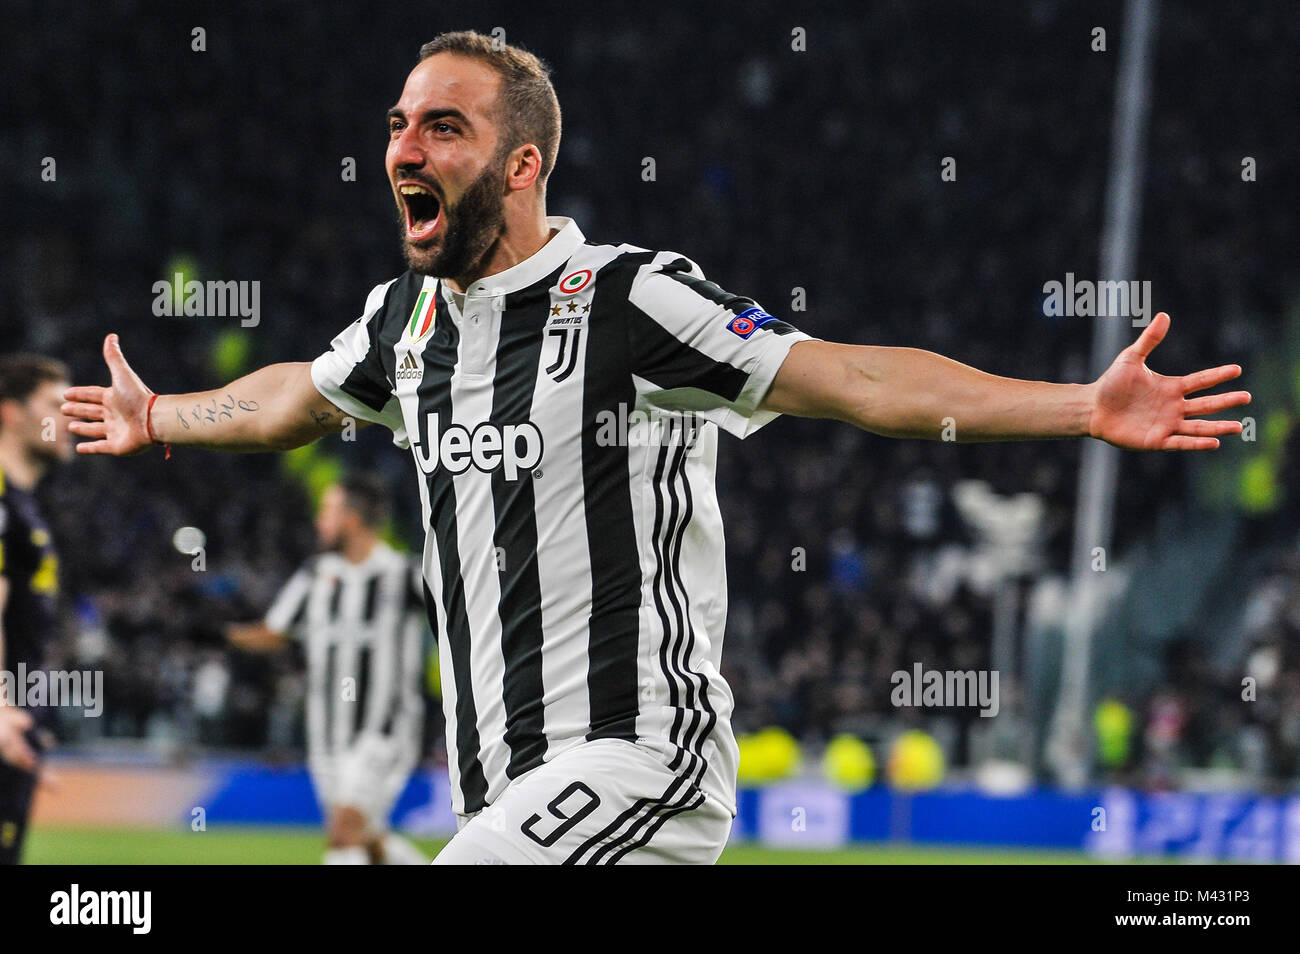 Turin, Italy. 13th February, 2018. Gonzalo Higuain (Juventus FC) during the UEFA Champions League football match between Juventus FC and Tottenham Hotspur at Allianz Stadium on 13 February, 2018 in Turin, Italy. Credit: FABIO PETROSINO/Alamy Live News Stock Photo